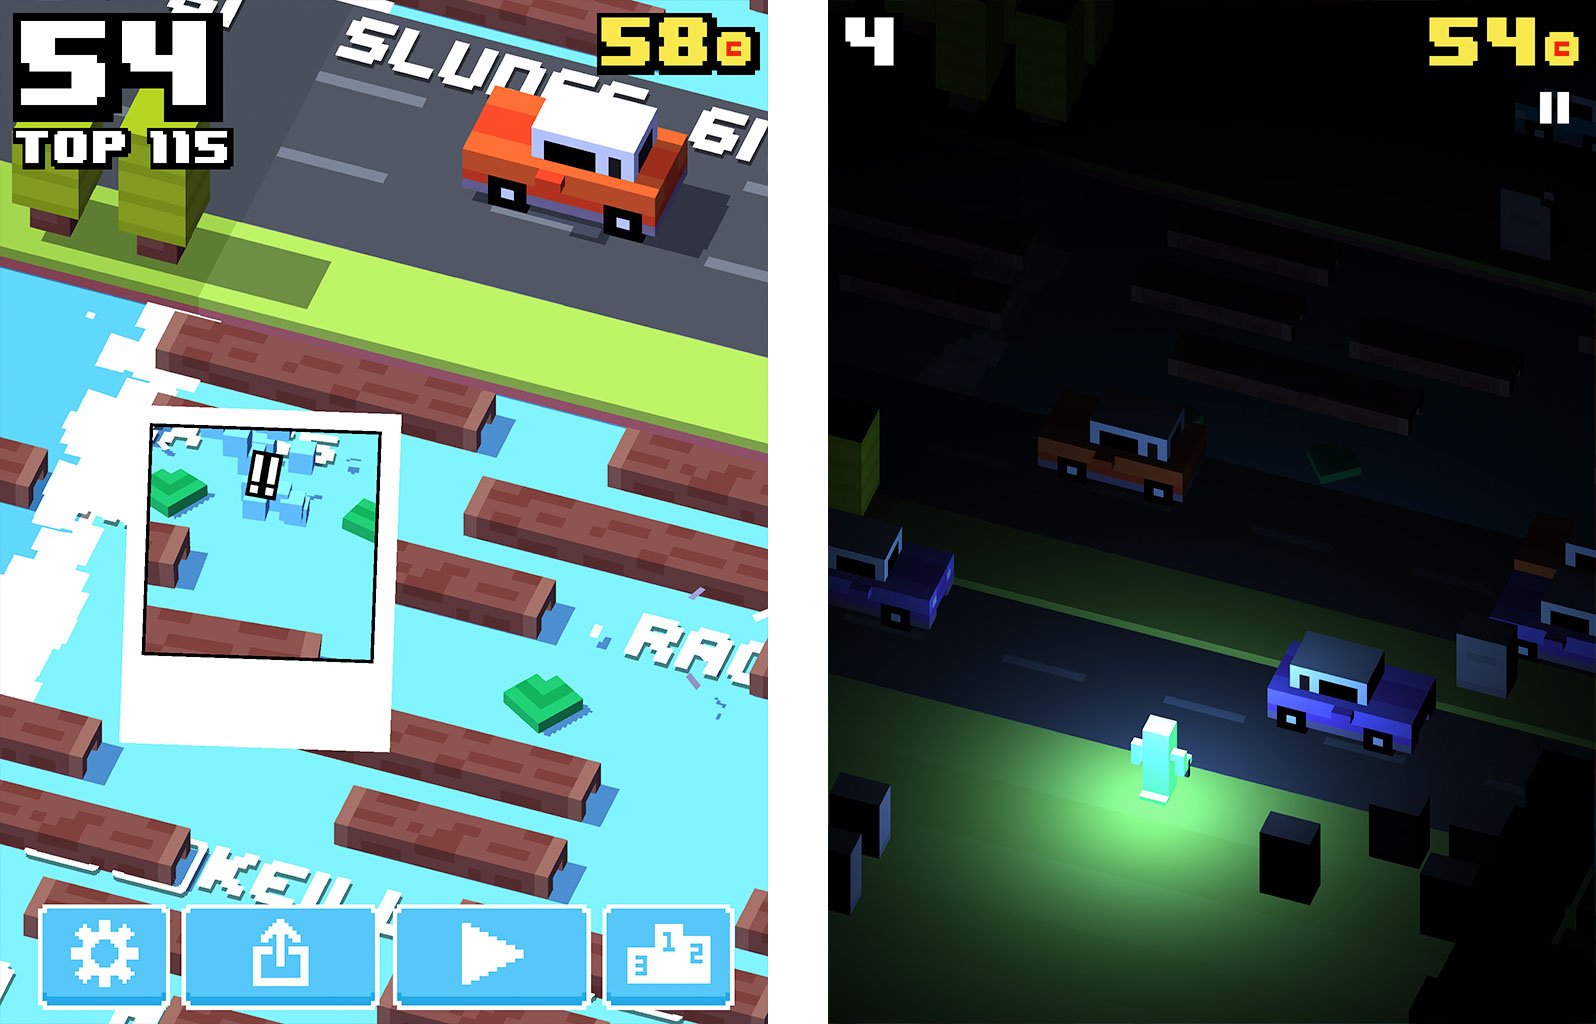 Crossy Road: Ten tips, hints, and cheats to getting further faster!